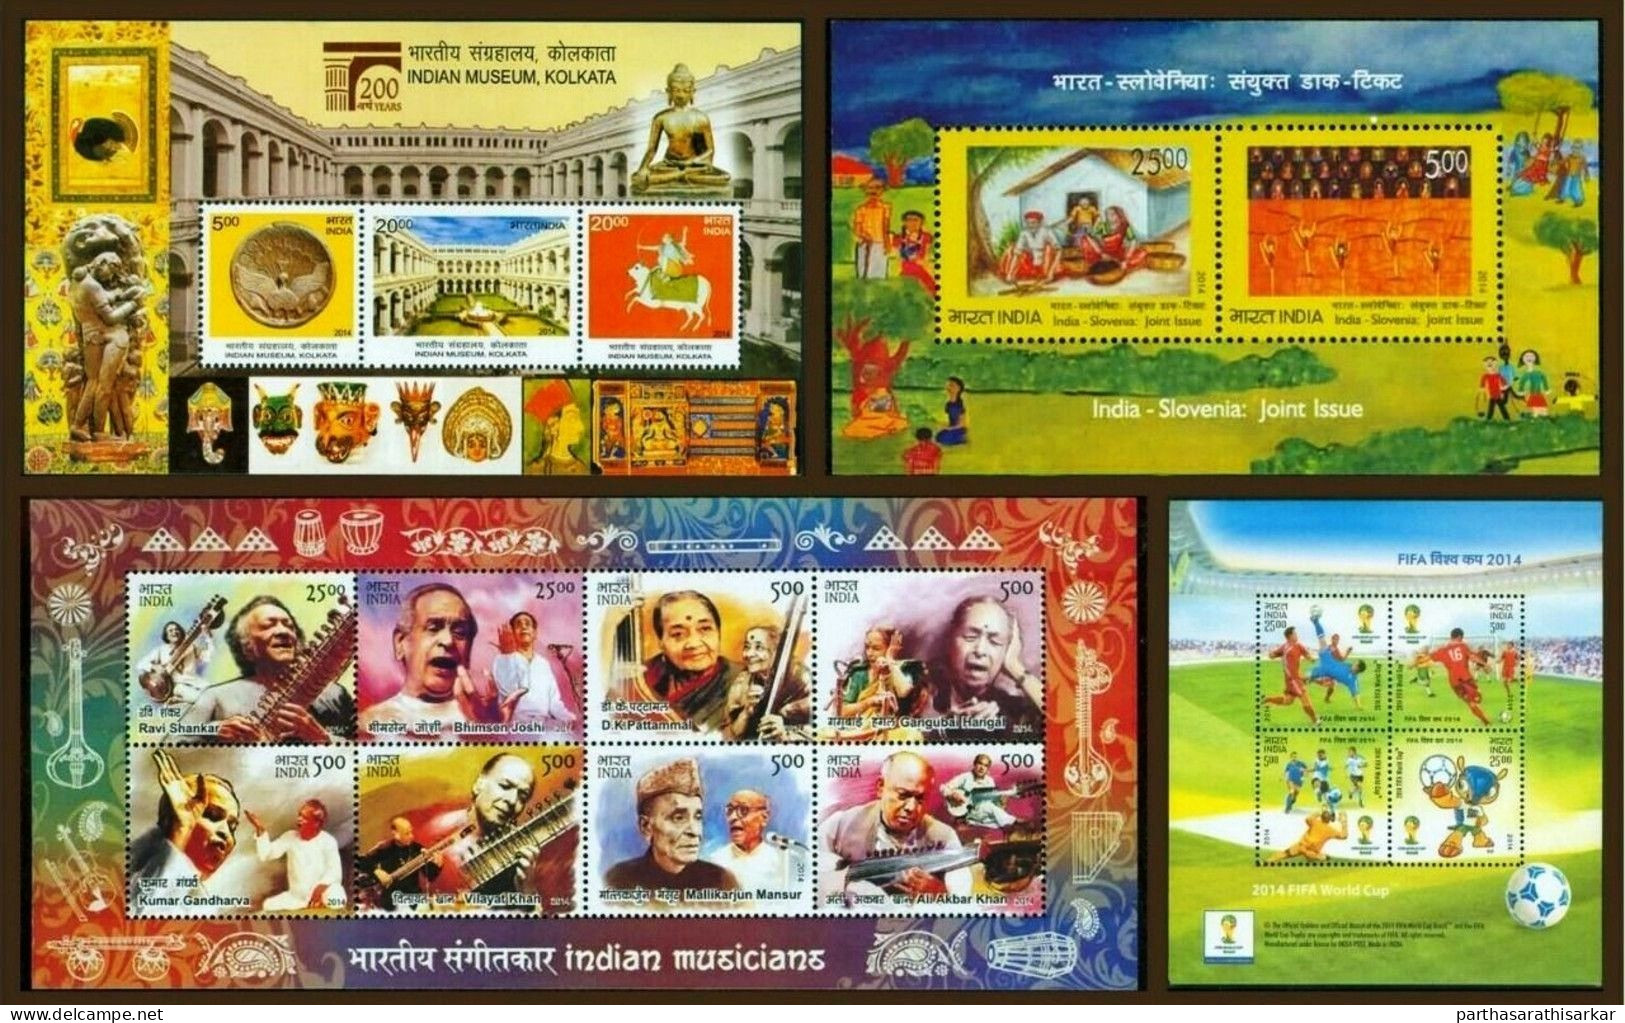 INDIA 2014 COMPLETE YEAR PACK OF MINIATURE SHEETS CONTAINS 4 MINIATURE SHEET MS OF JOINT ISSUES FOOT BALL AND OTHERS MNH - Unused Stamps